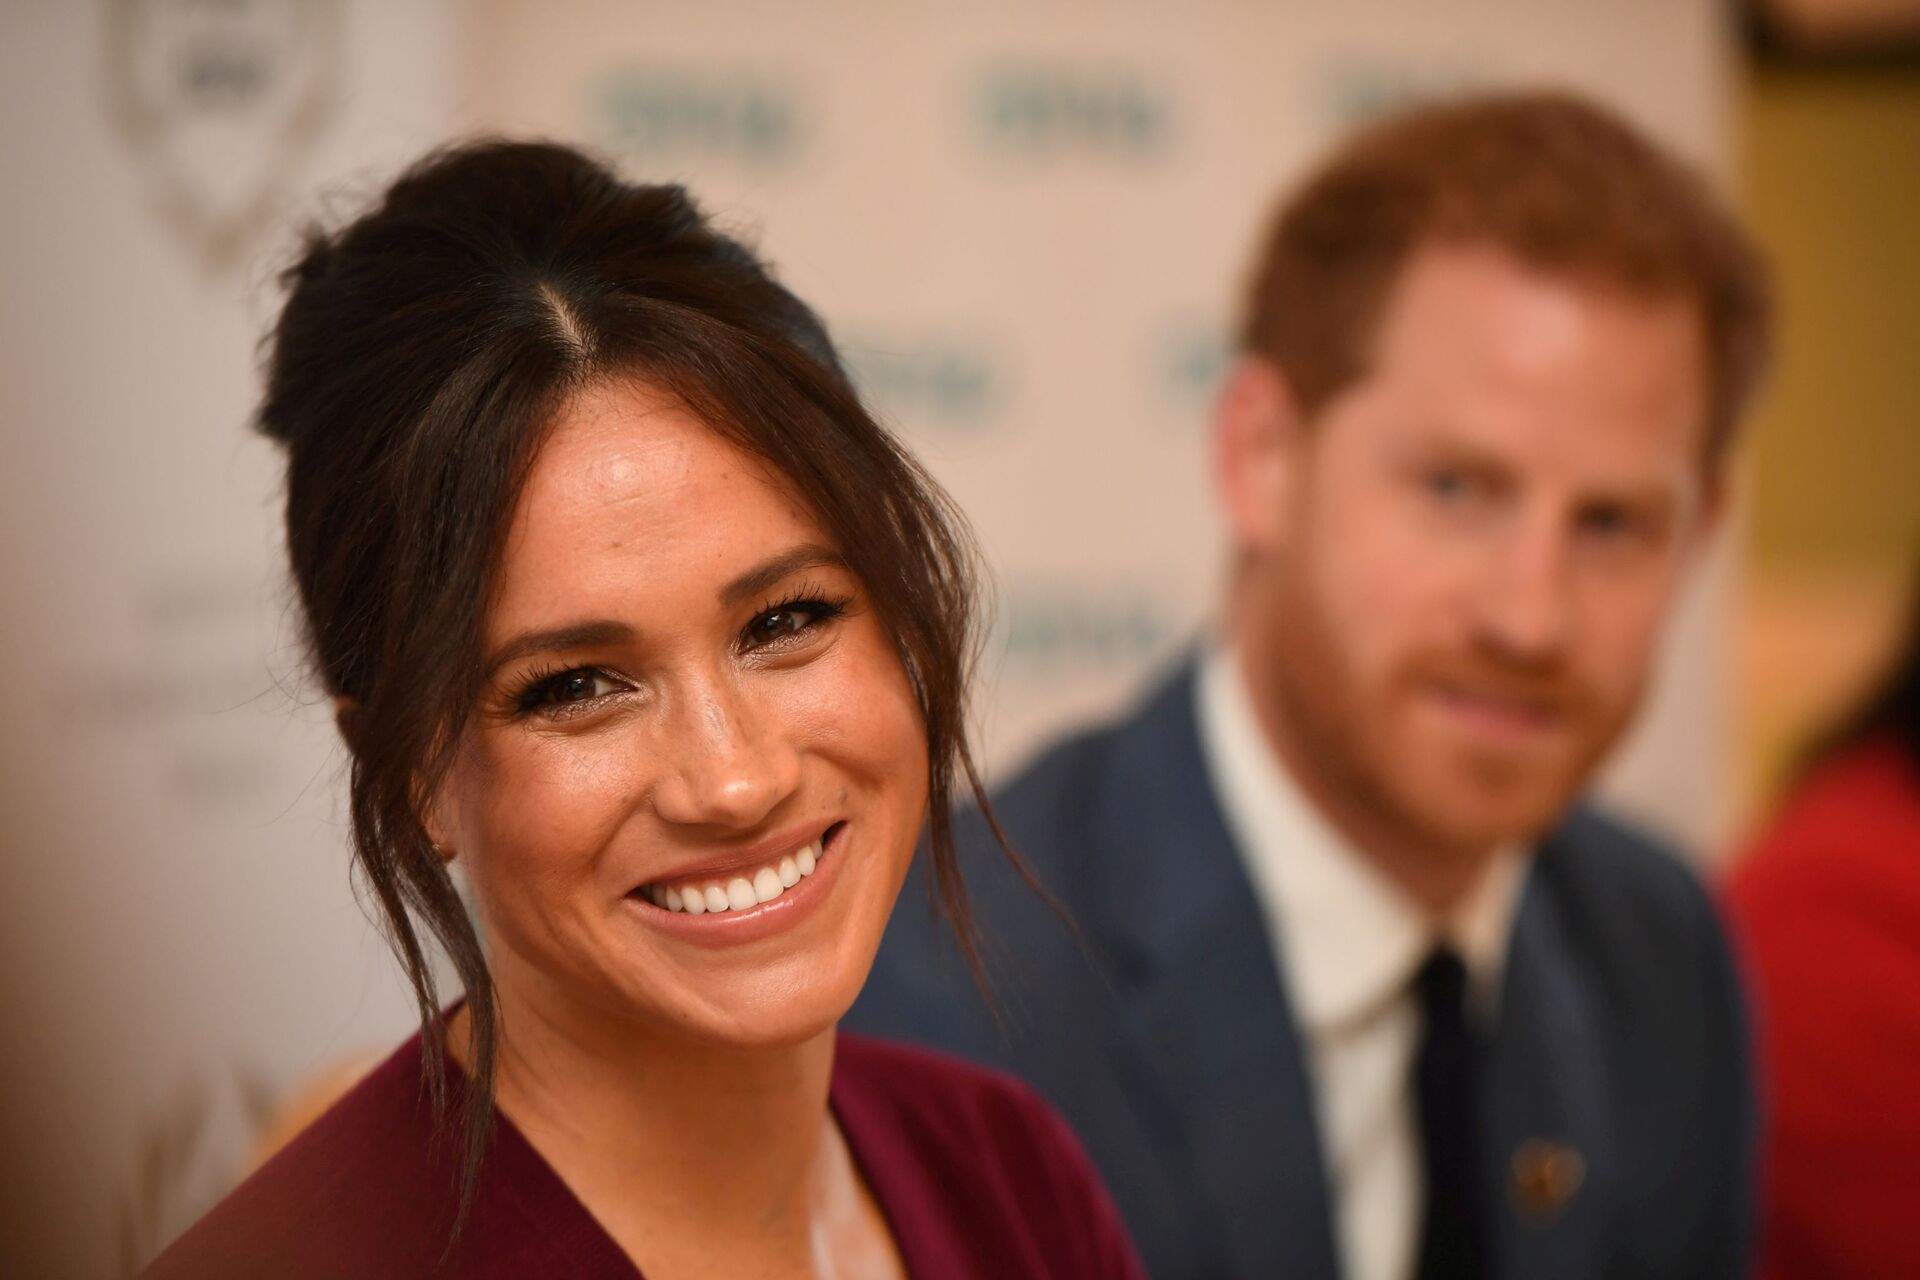 Prince Harry Describes How He Helped Meghan Cope With Mental Issues - Sputnik International, 1920, 28.05.2021